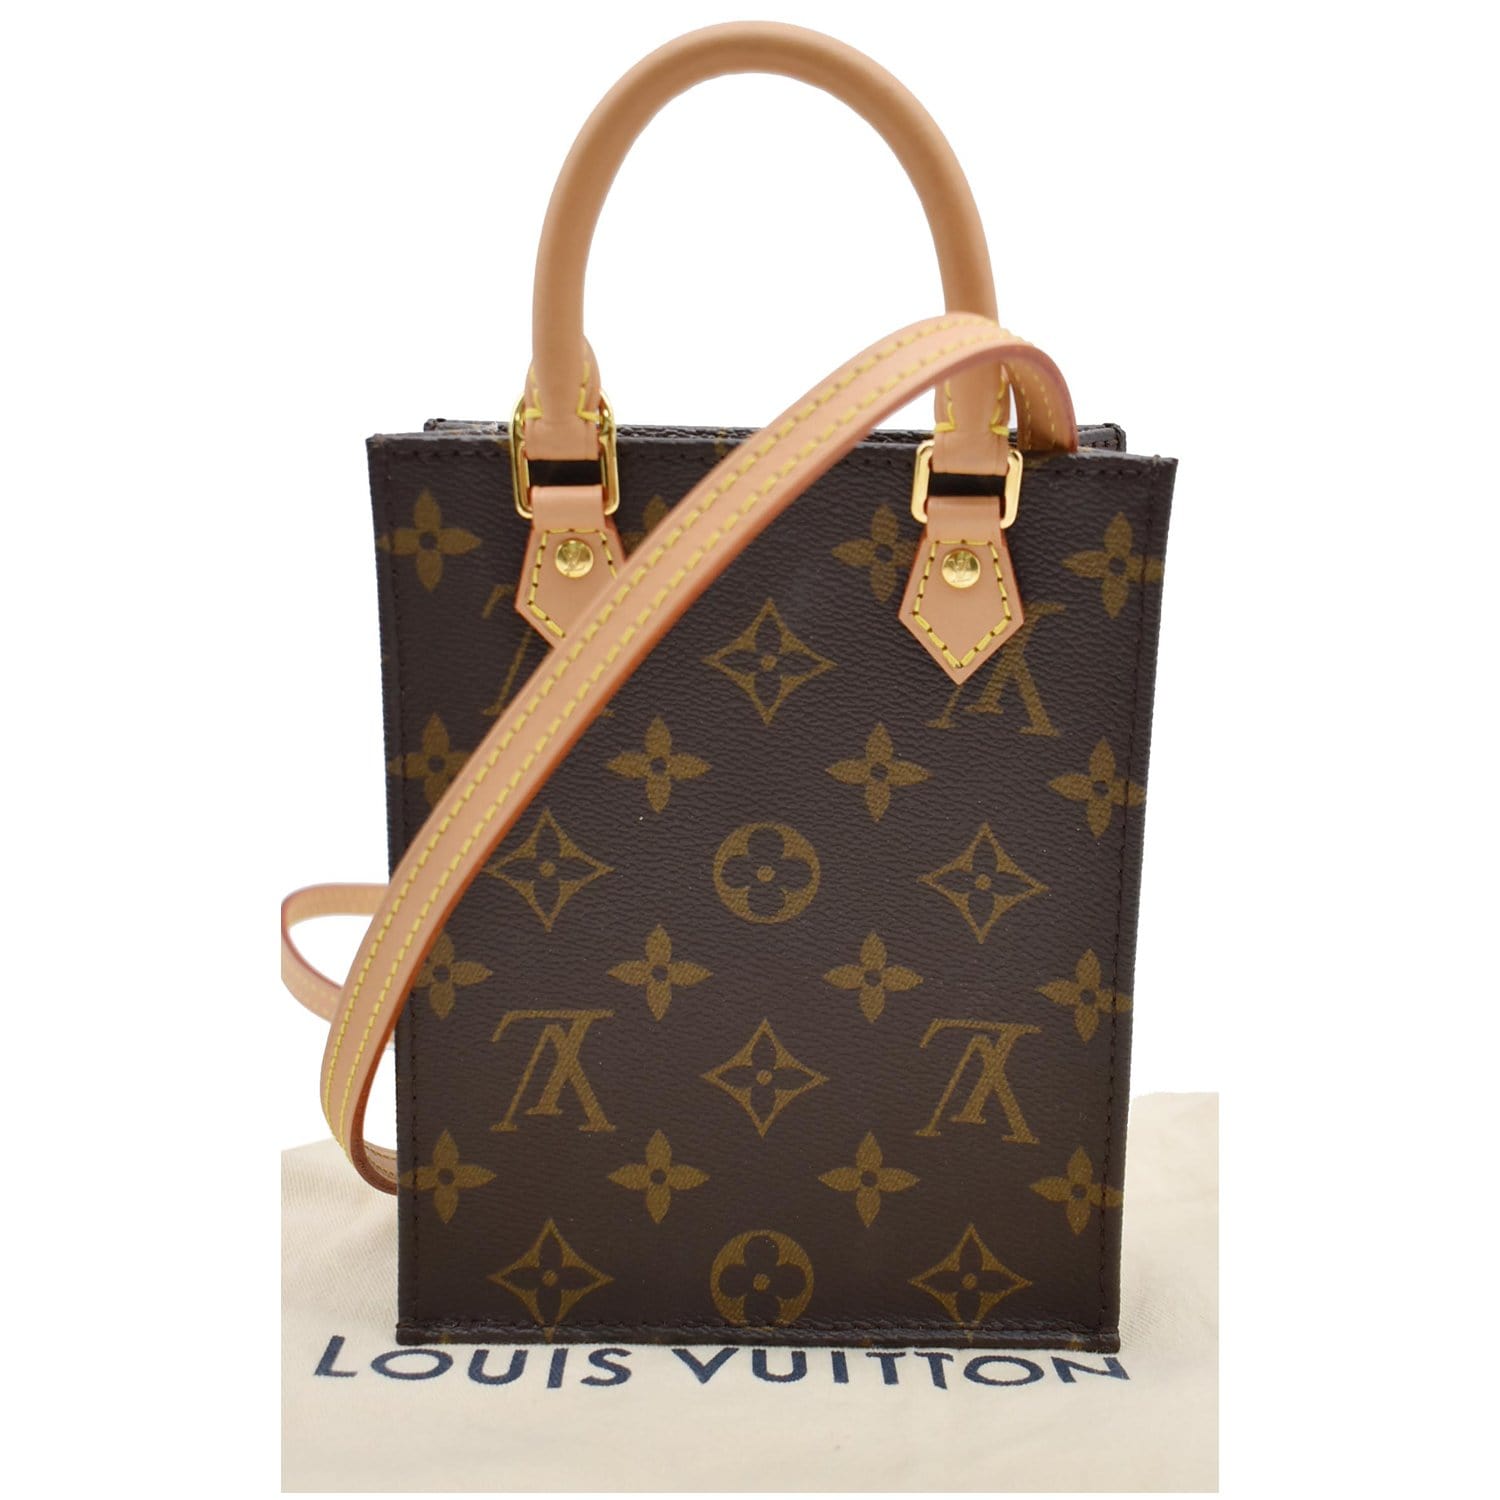 Petit Sac Plat I finally got my hands on. LOVE this bag so far. Have  purchased SLG and some preloved pieces but this is my first bag 🤍 : r/ Louisvuitton